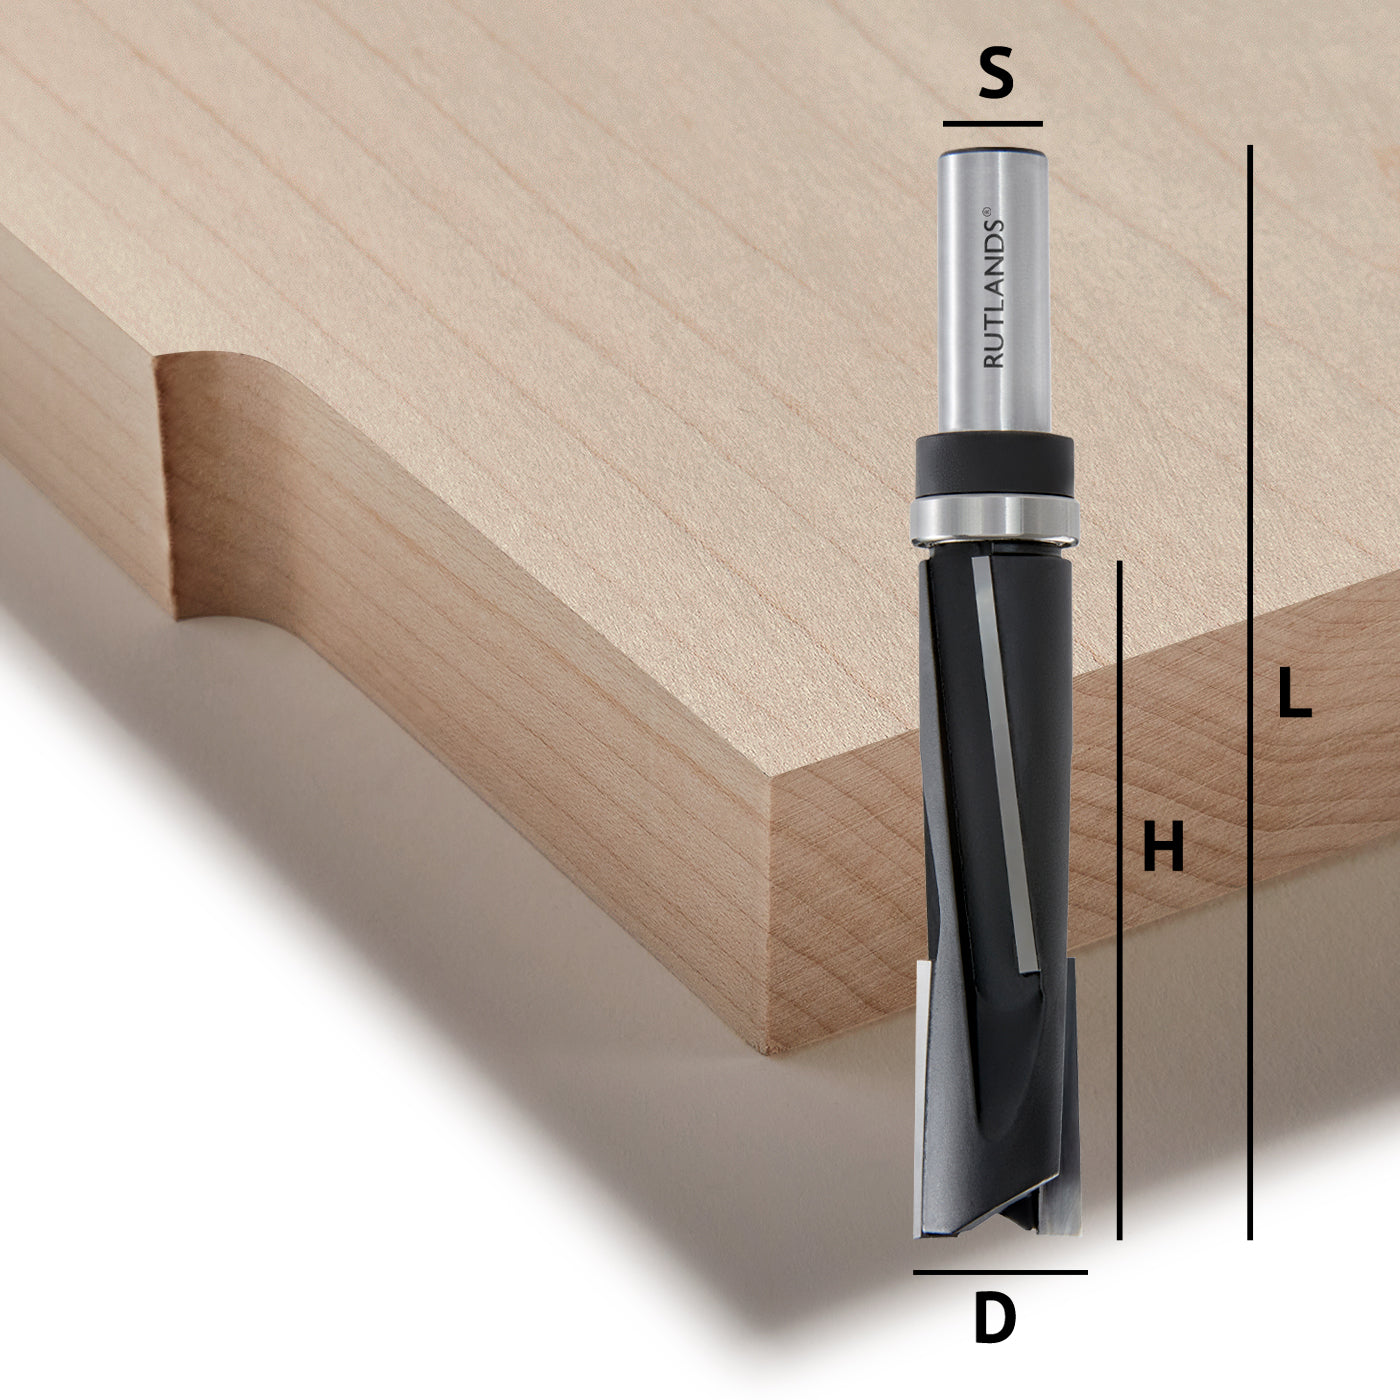 Router Bit - Plunge Trim Up and Down Shear - D=19mm H=75mm L=121mm S=1/2"